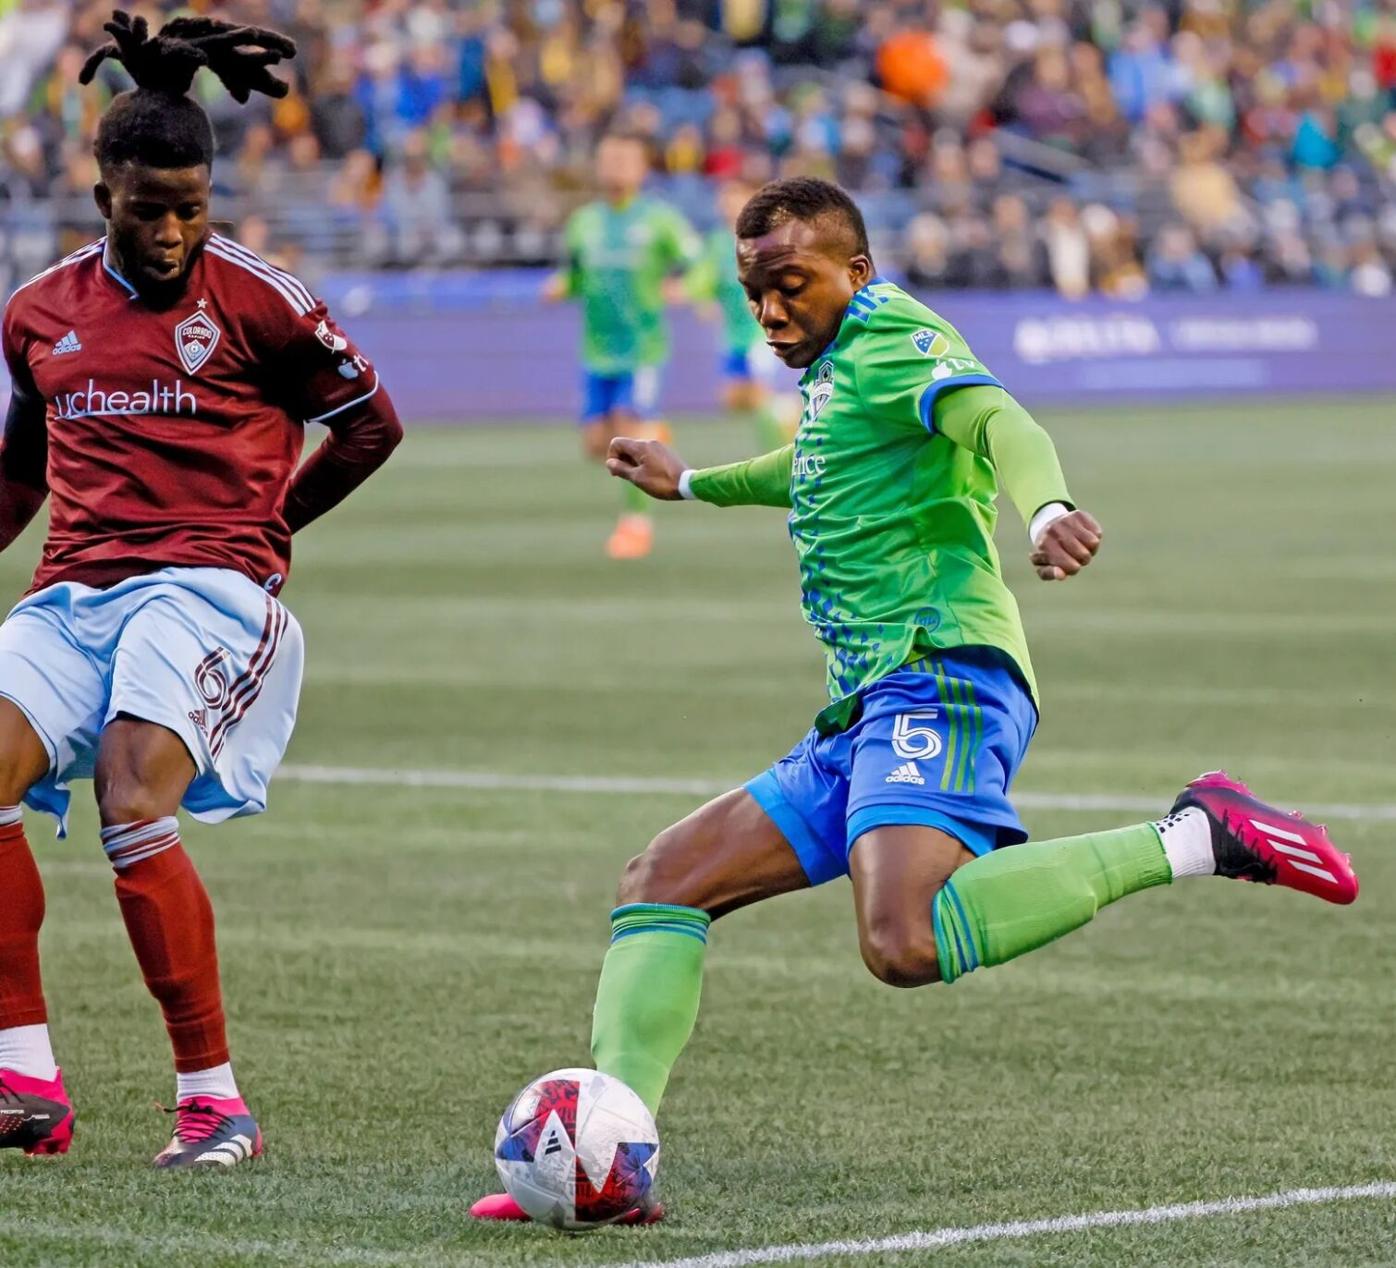 KNOW YOUR ENEMY: Seattle Sounders FC